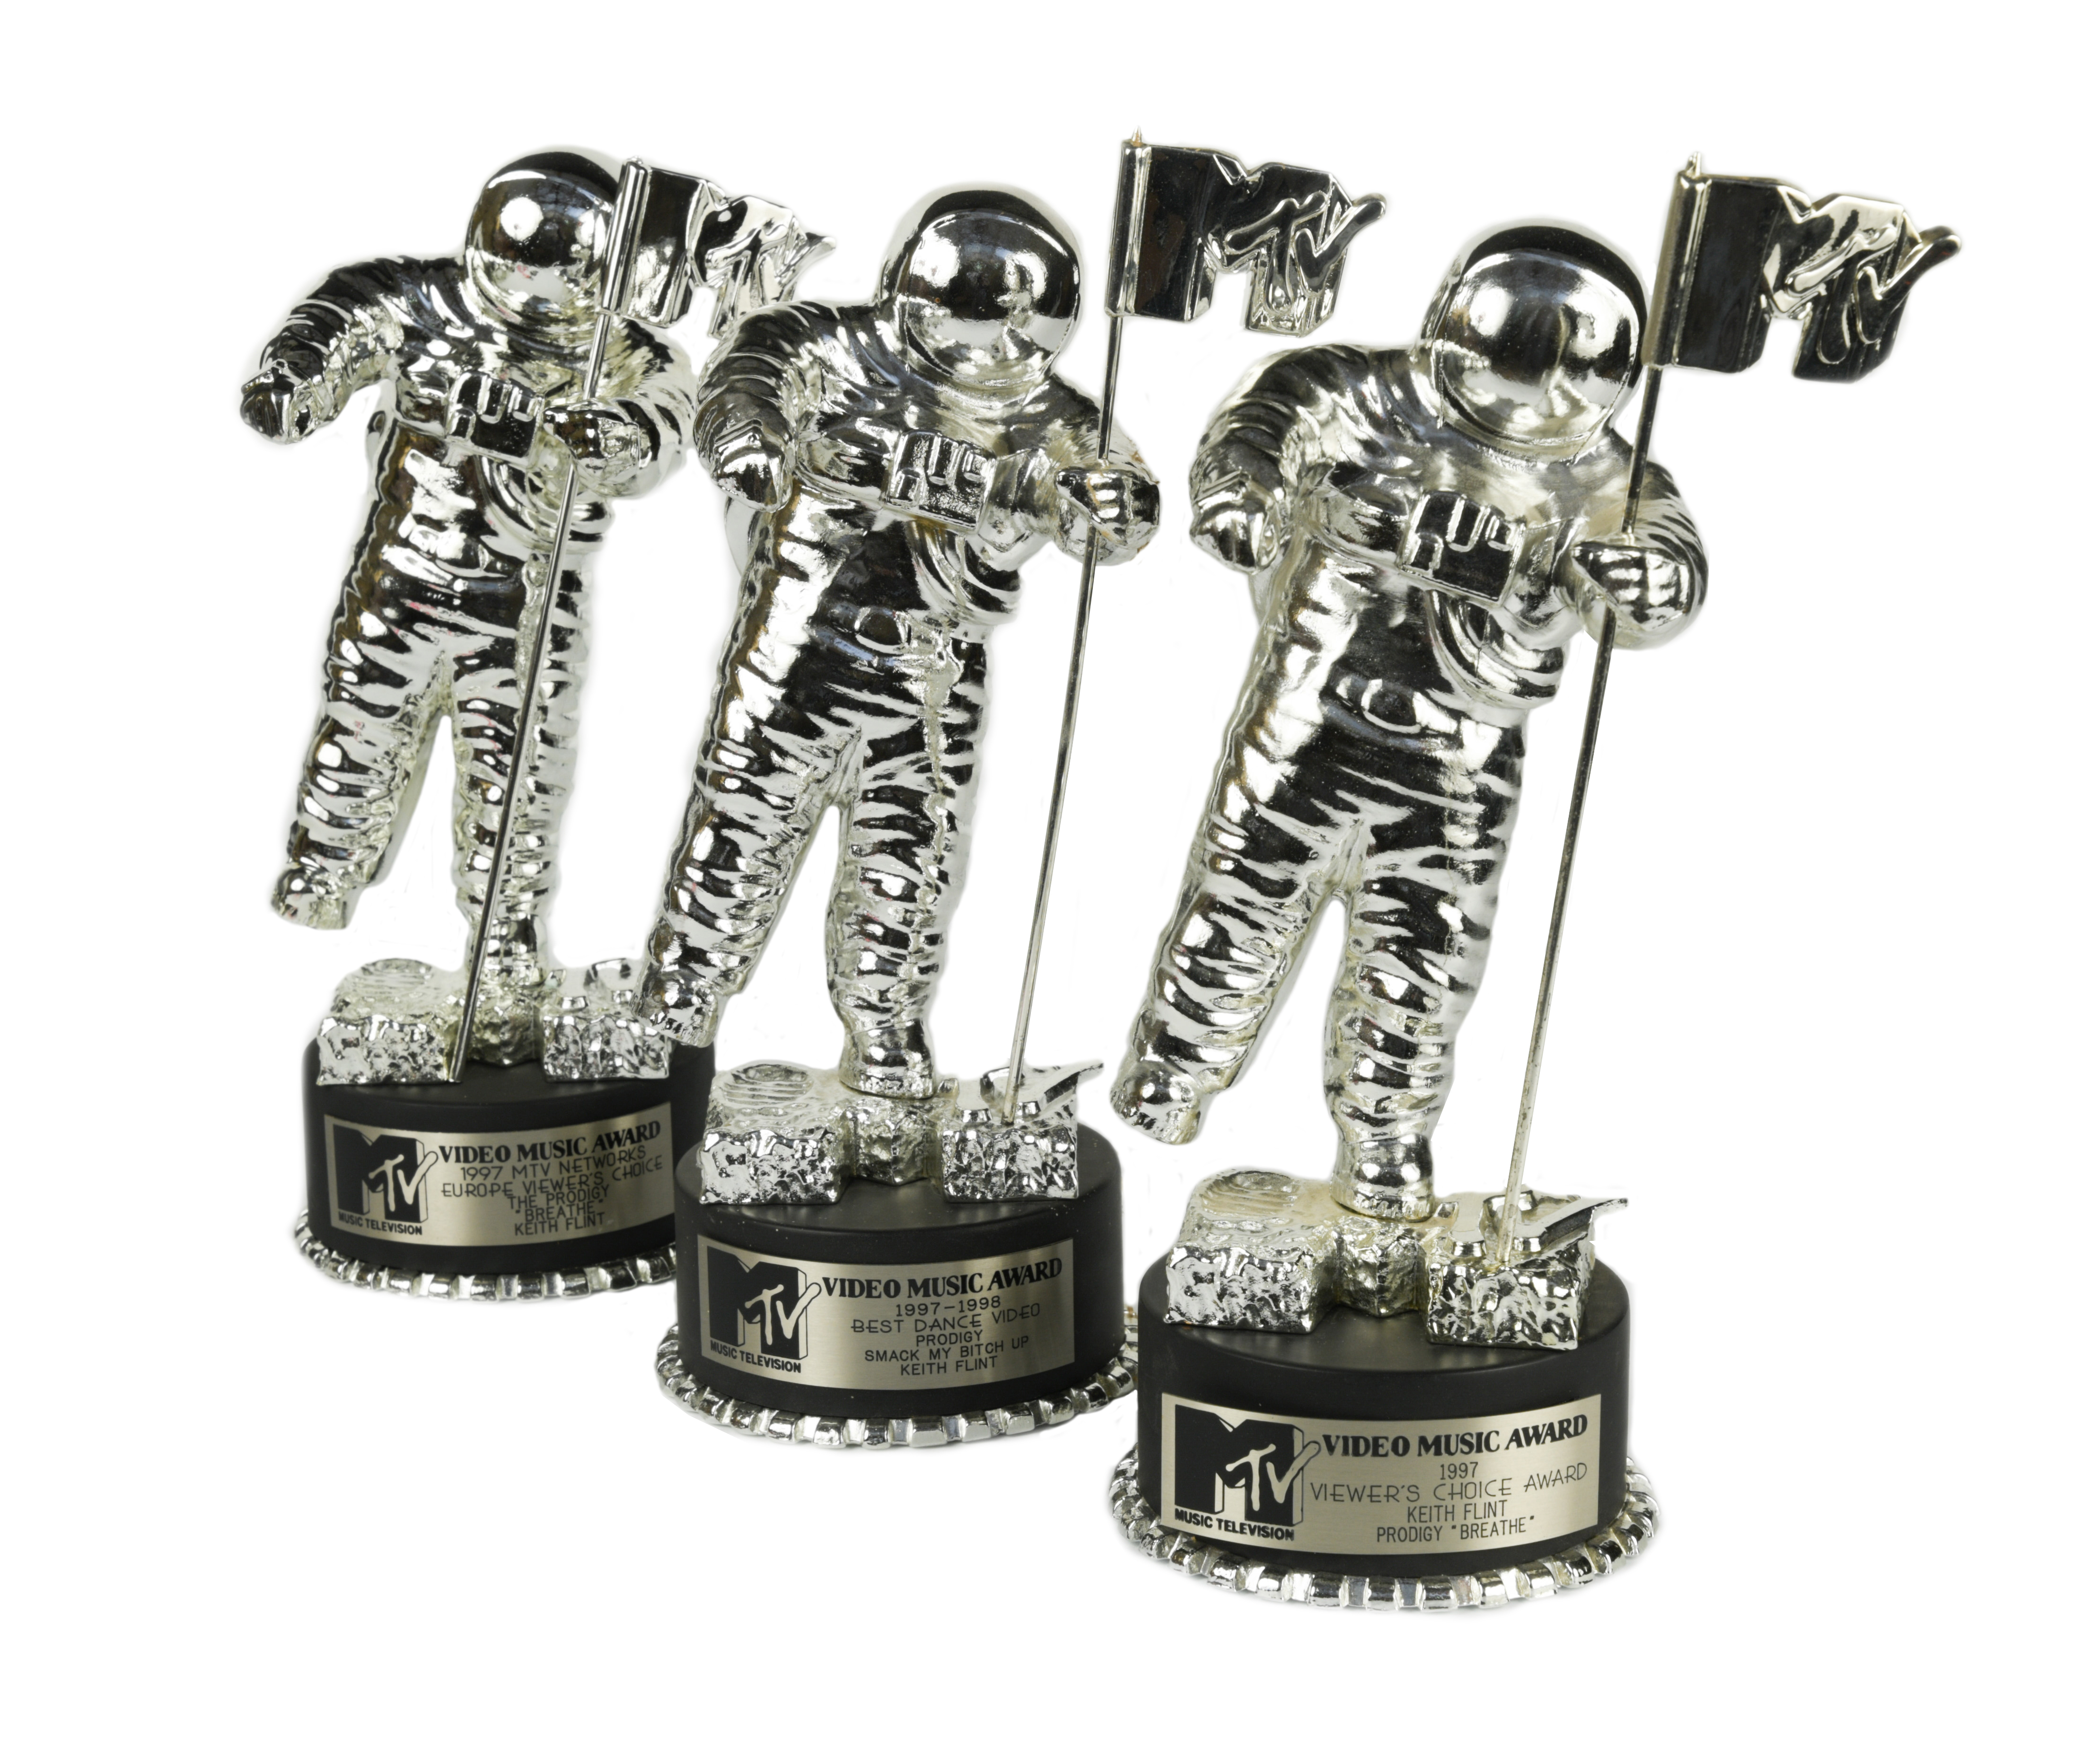 Keith Flint's MTV music awards will be sold at auction. (Cheffins/ PA)